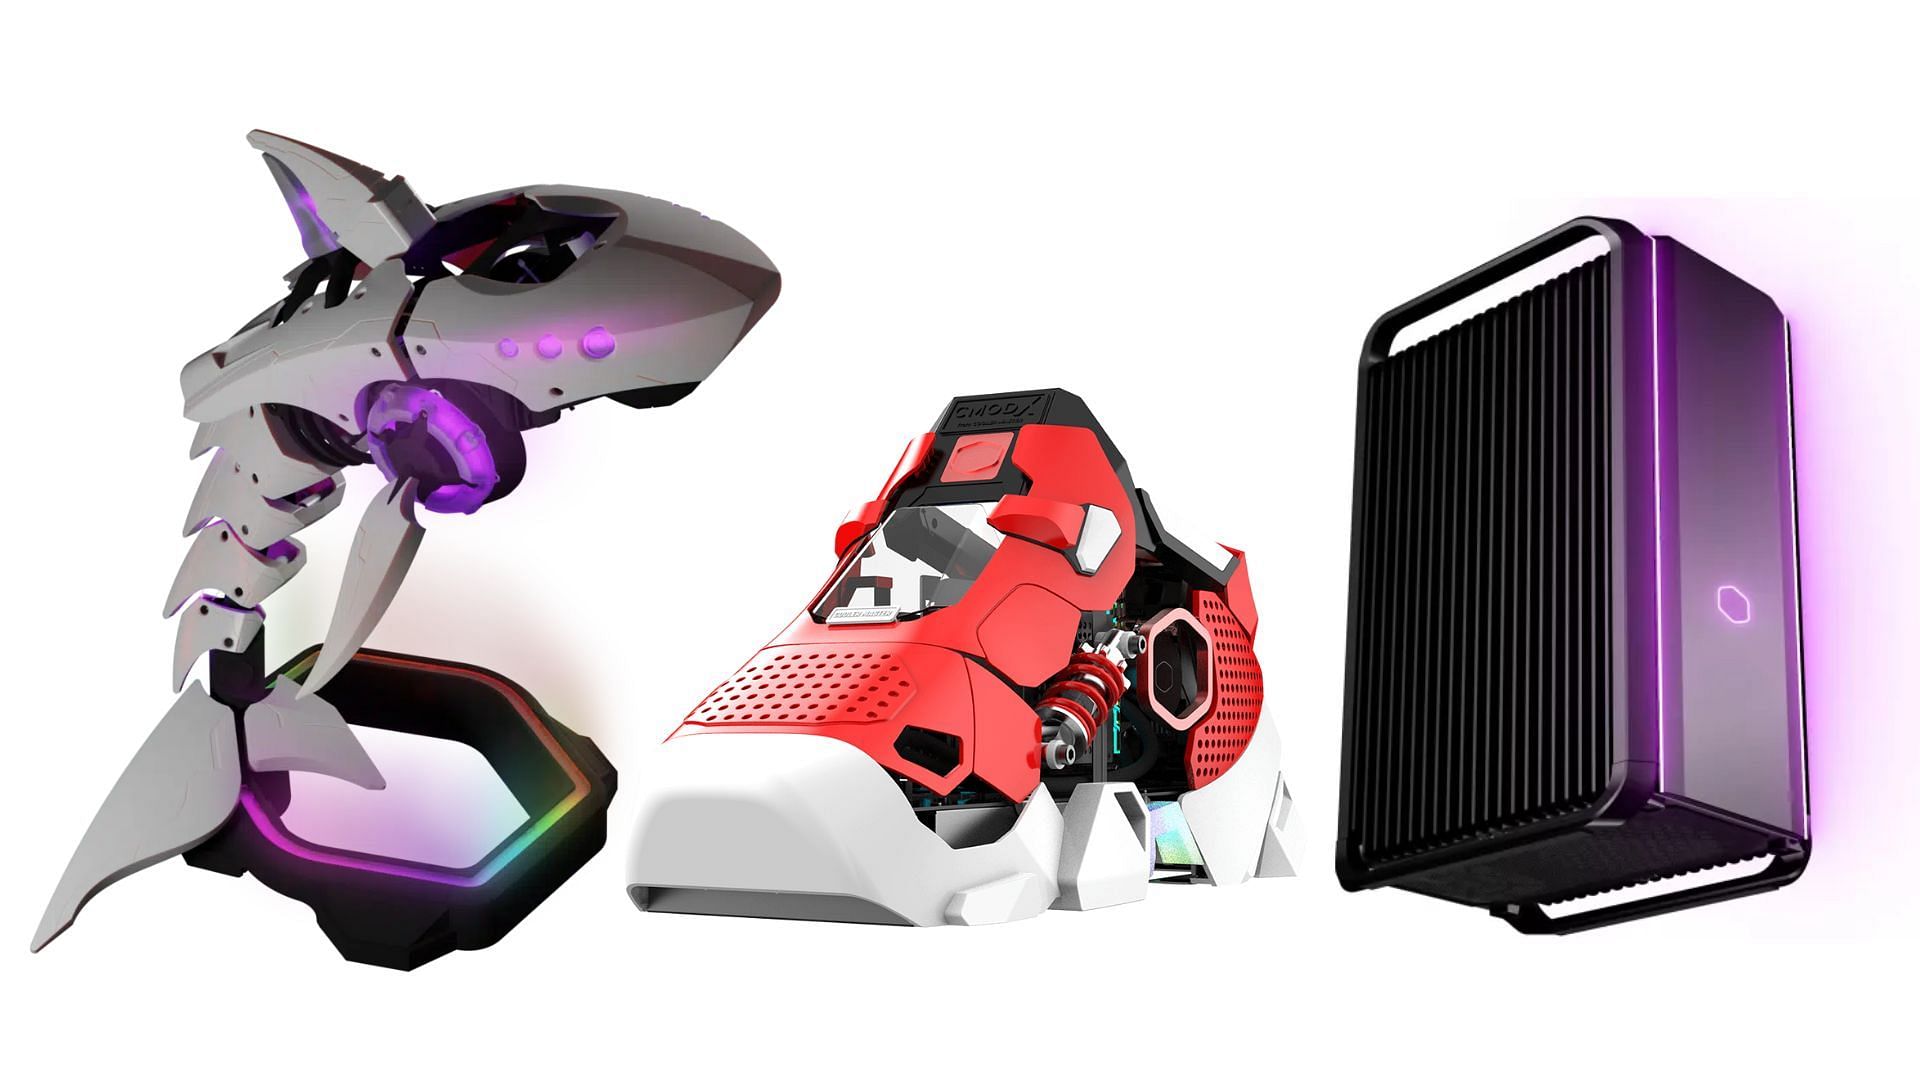 Master shows Shark X, Sneaker X, Cooling X, products at CES features, pricing, and more